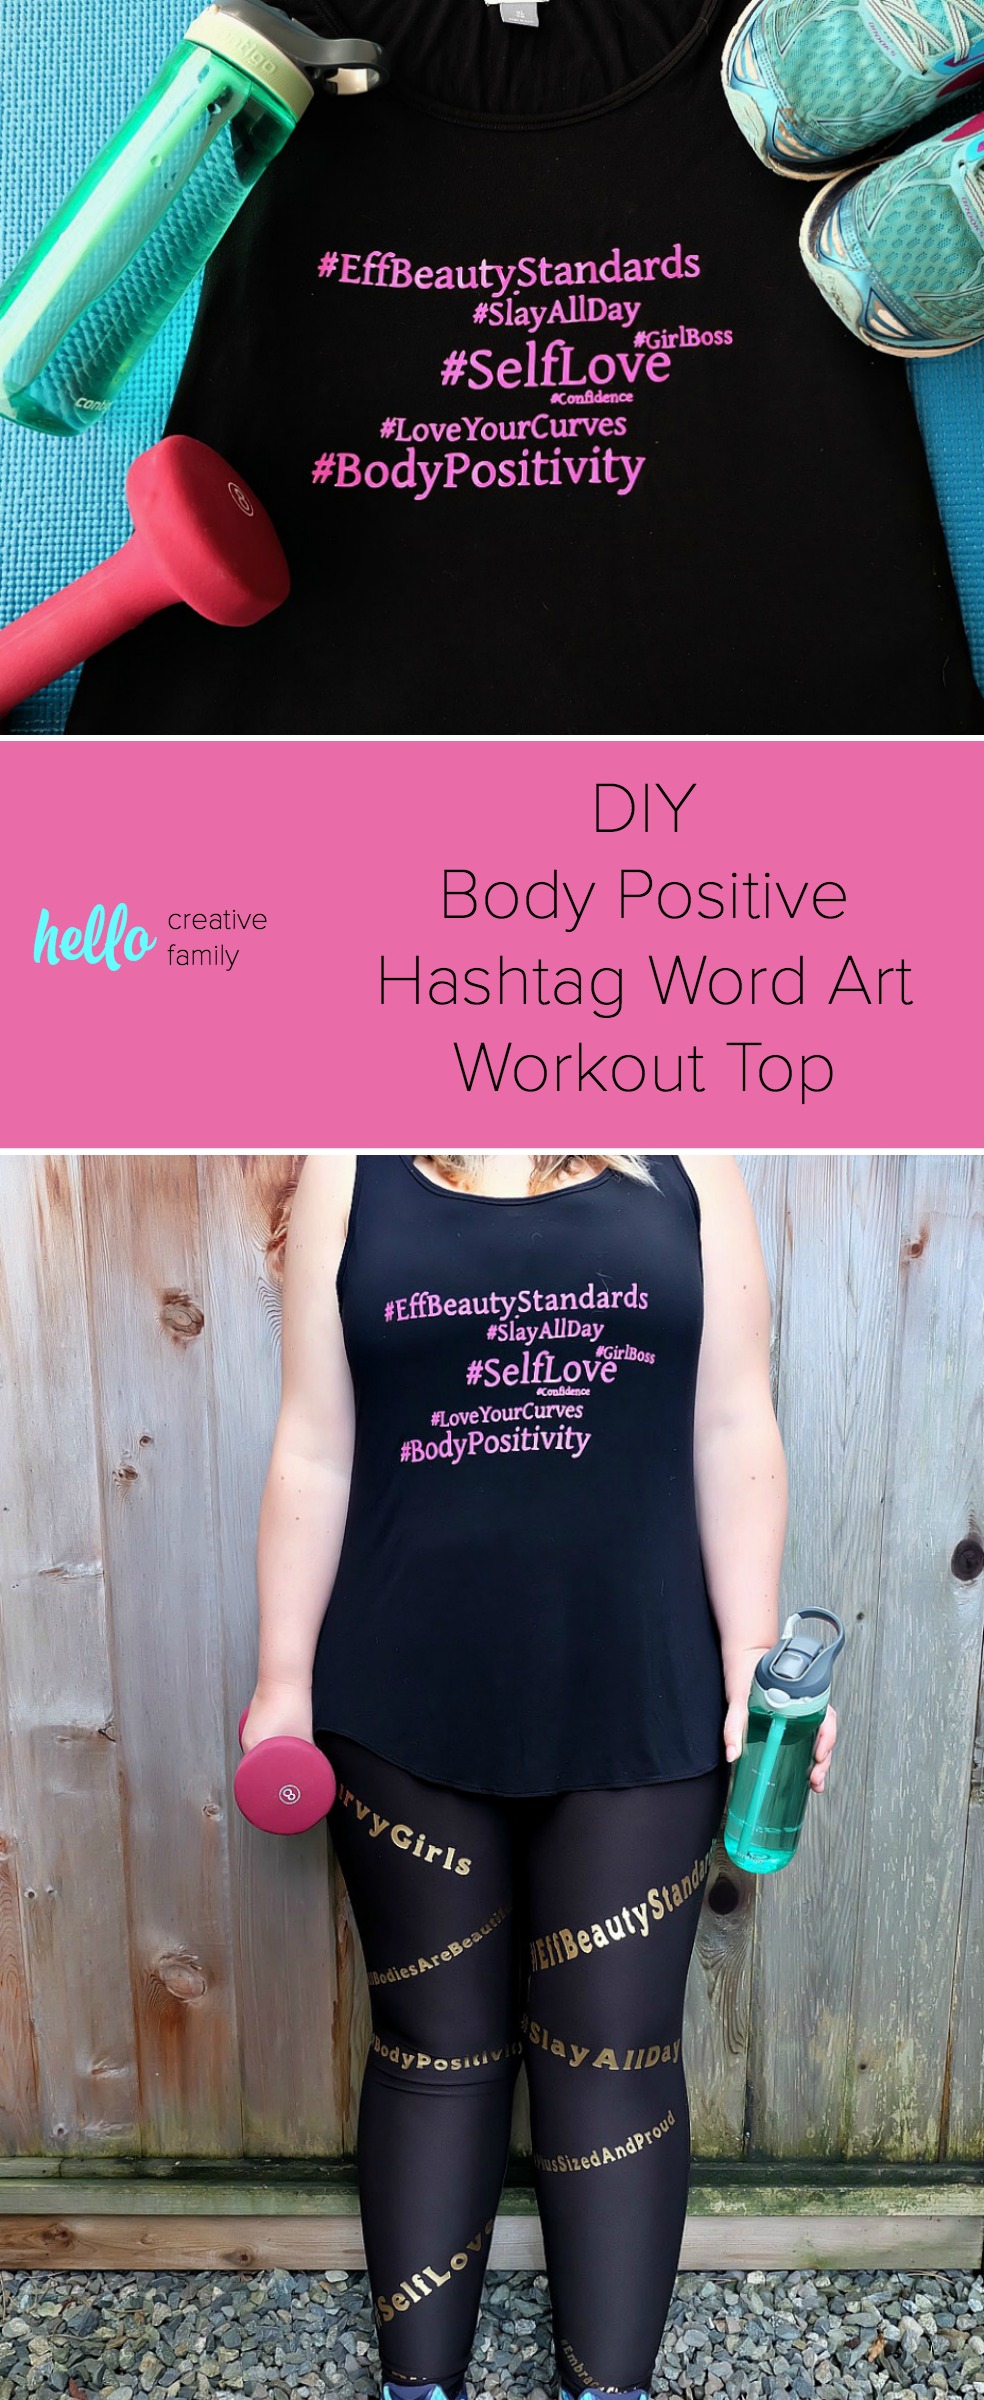 Embrace the curves, love your body, and encourage others to feel the self love with these awesome DIY Body Positive Hashtag Workout Top and Leggings. Perfect for plus sized fitness fashion, this easy project is fun and playful. Made using the Cricut Explore or Cricut Maker and ultra stretchy Cricut SportFlex Iron-On. Free cut files. #BodyPositive #fitness #PlusSizedFashion #CricutMade #Cricut